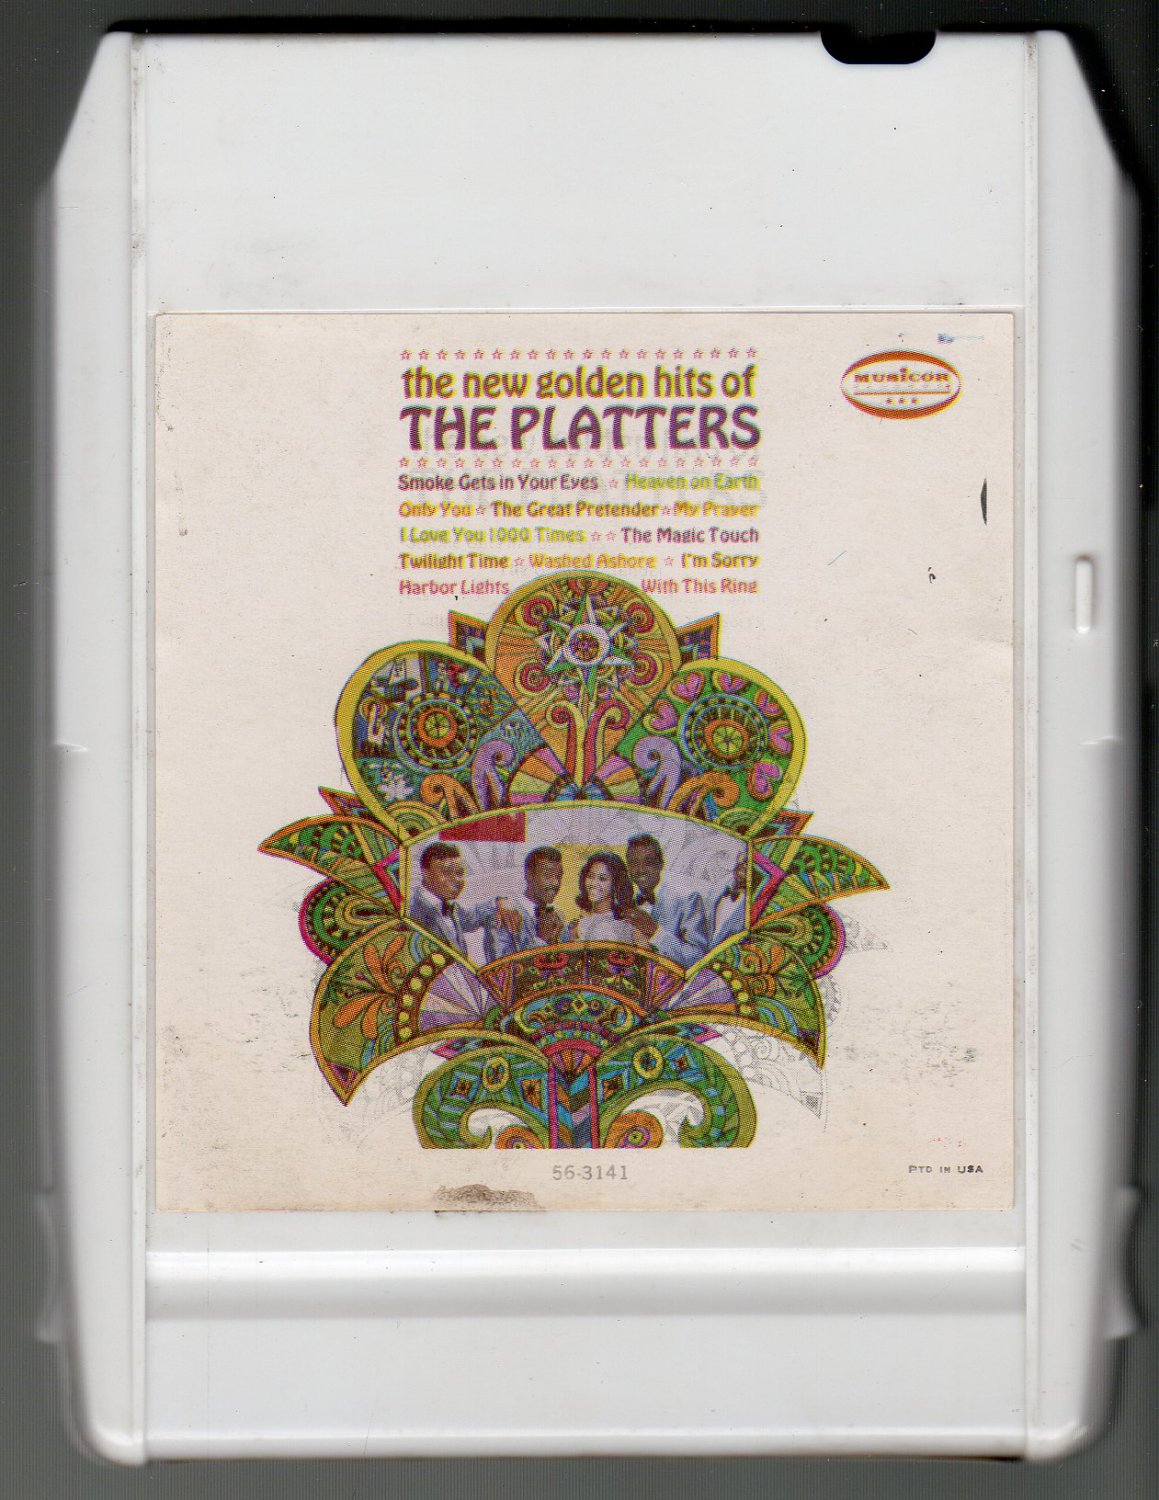 The Platters - New Golden Hits Of 1967 MUSICOR ITCC A50 8-track tape